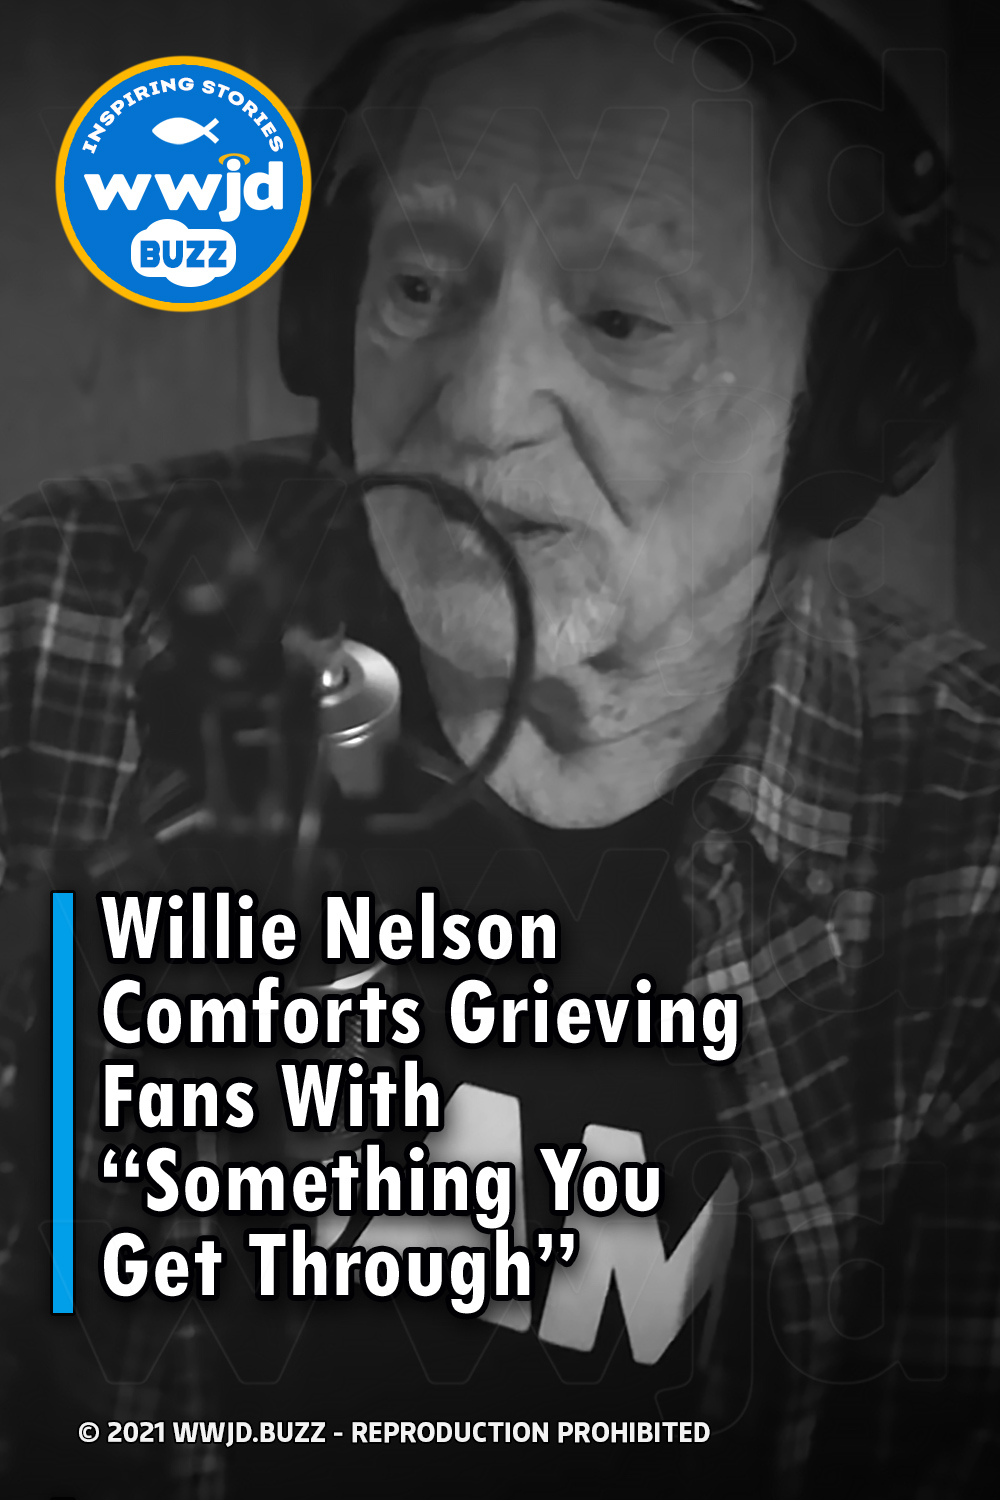 Willie Nelson Comforts Grieving Fans With \